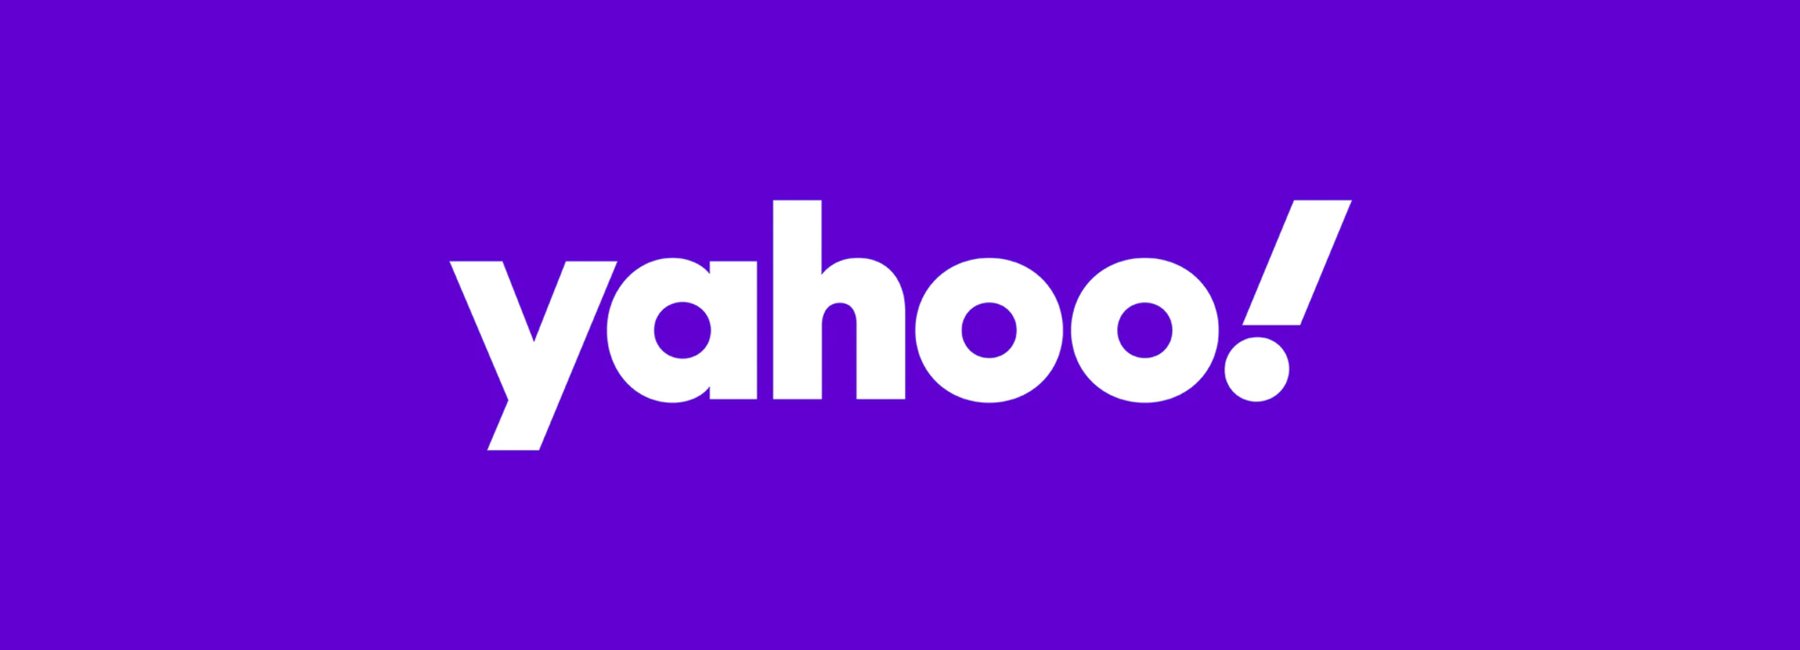 Yahoo Inc. sued for gross negligence after confirmed hacking